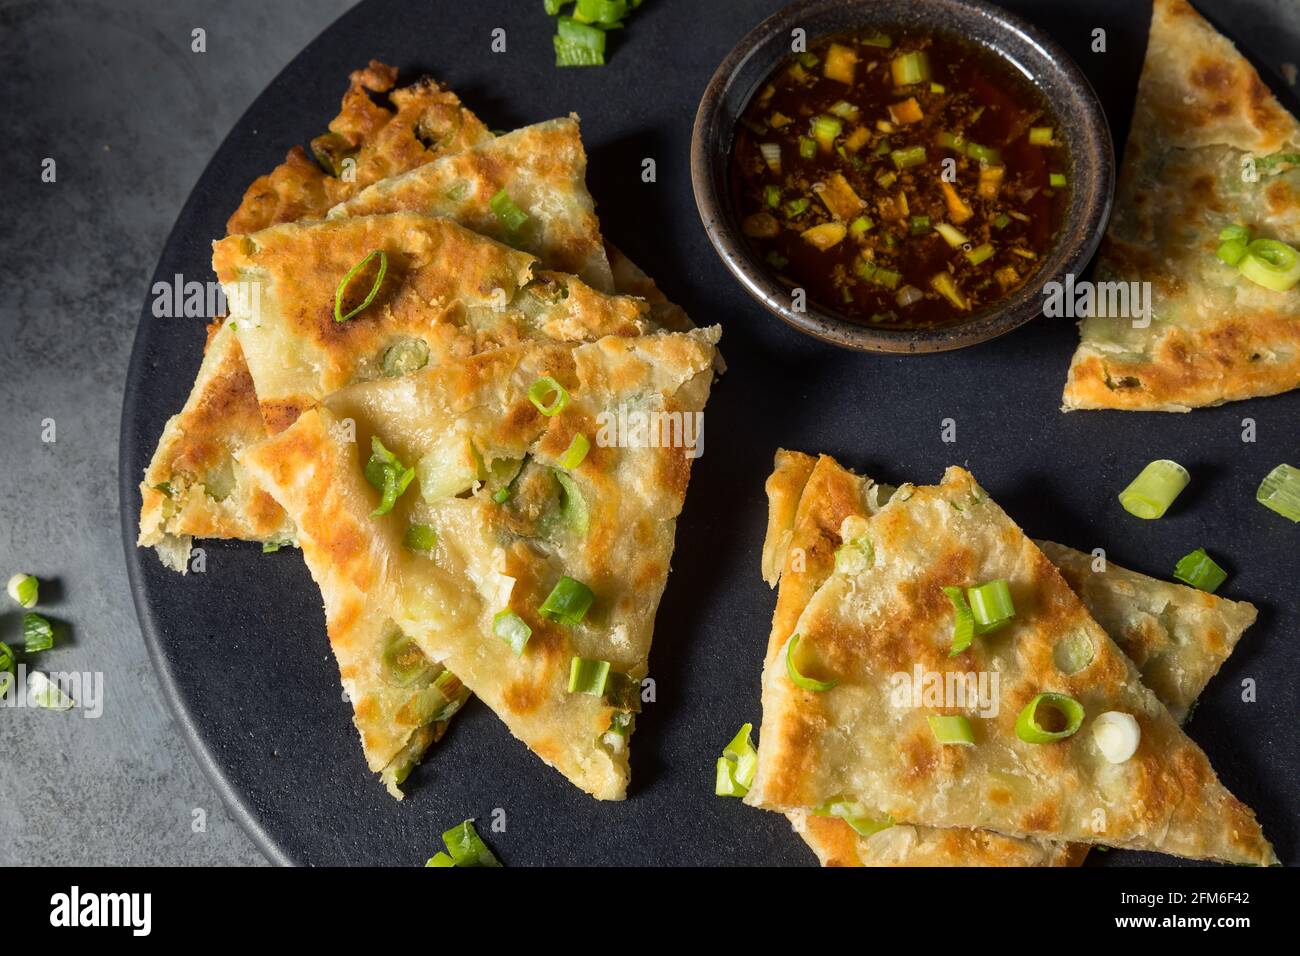 Homemade Chinese Scallion Pancake with Dipping Sauce Stock Photo